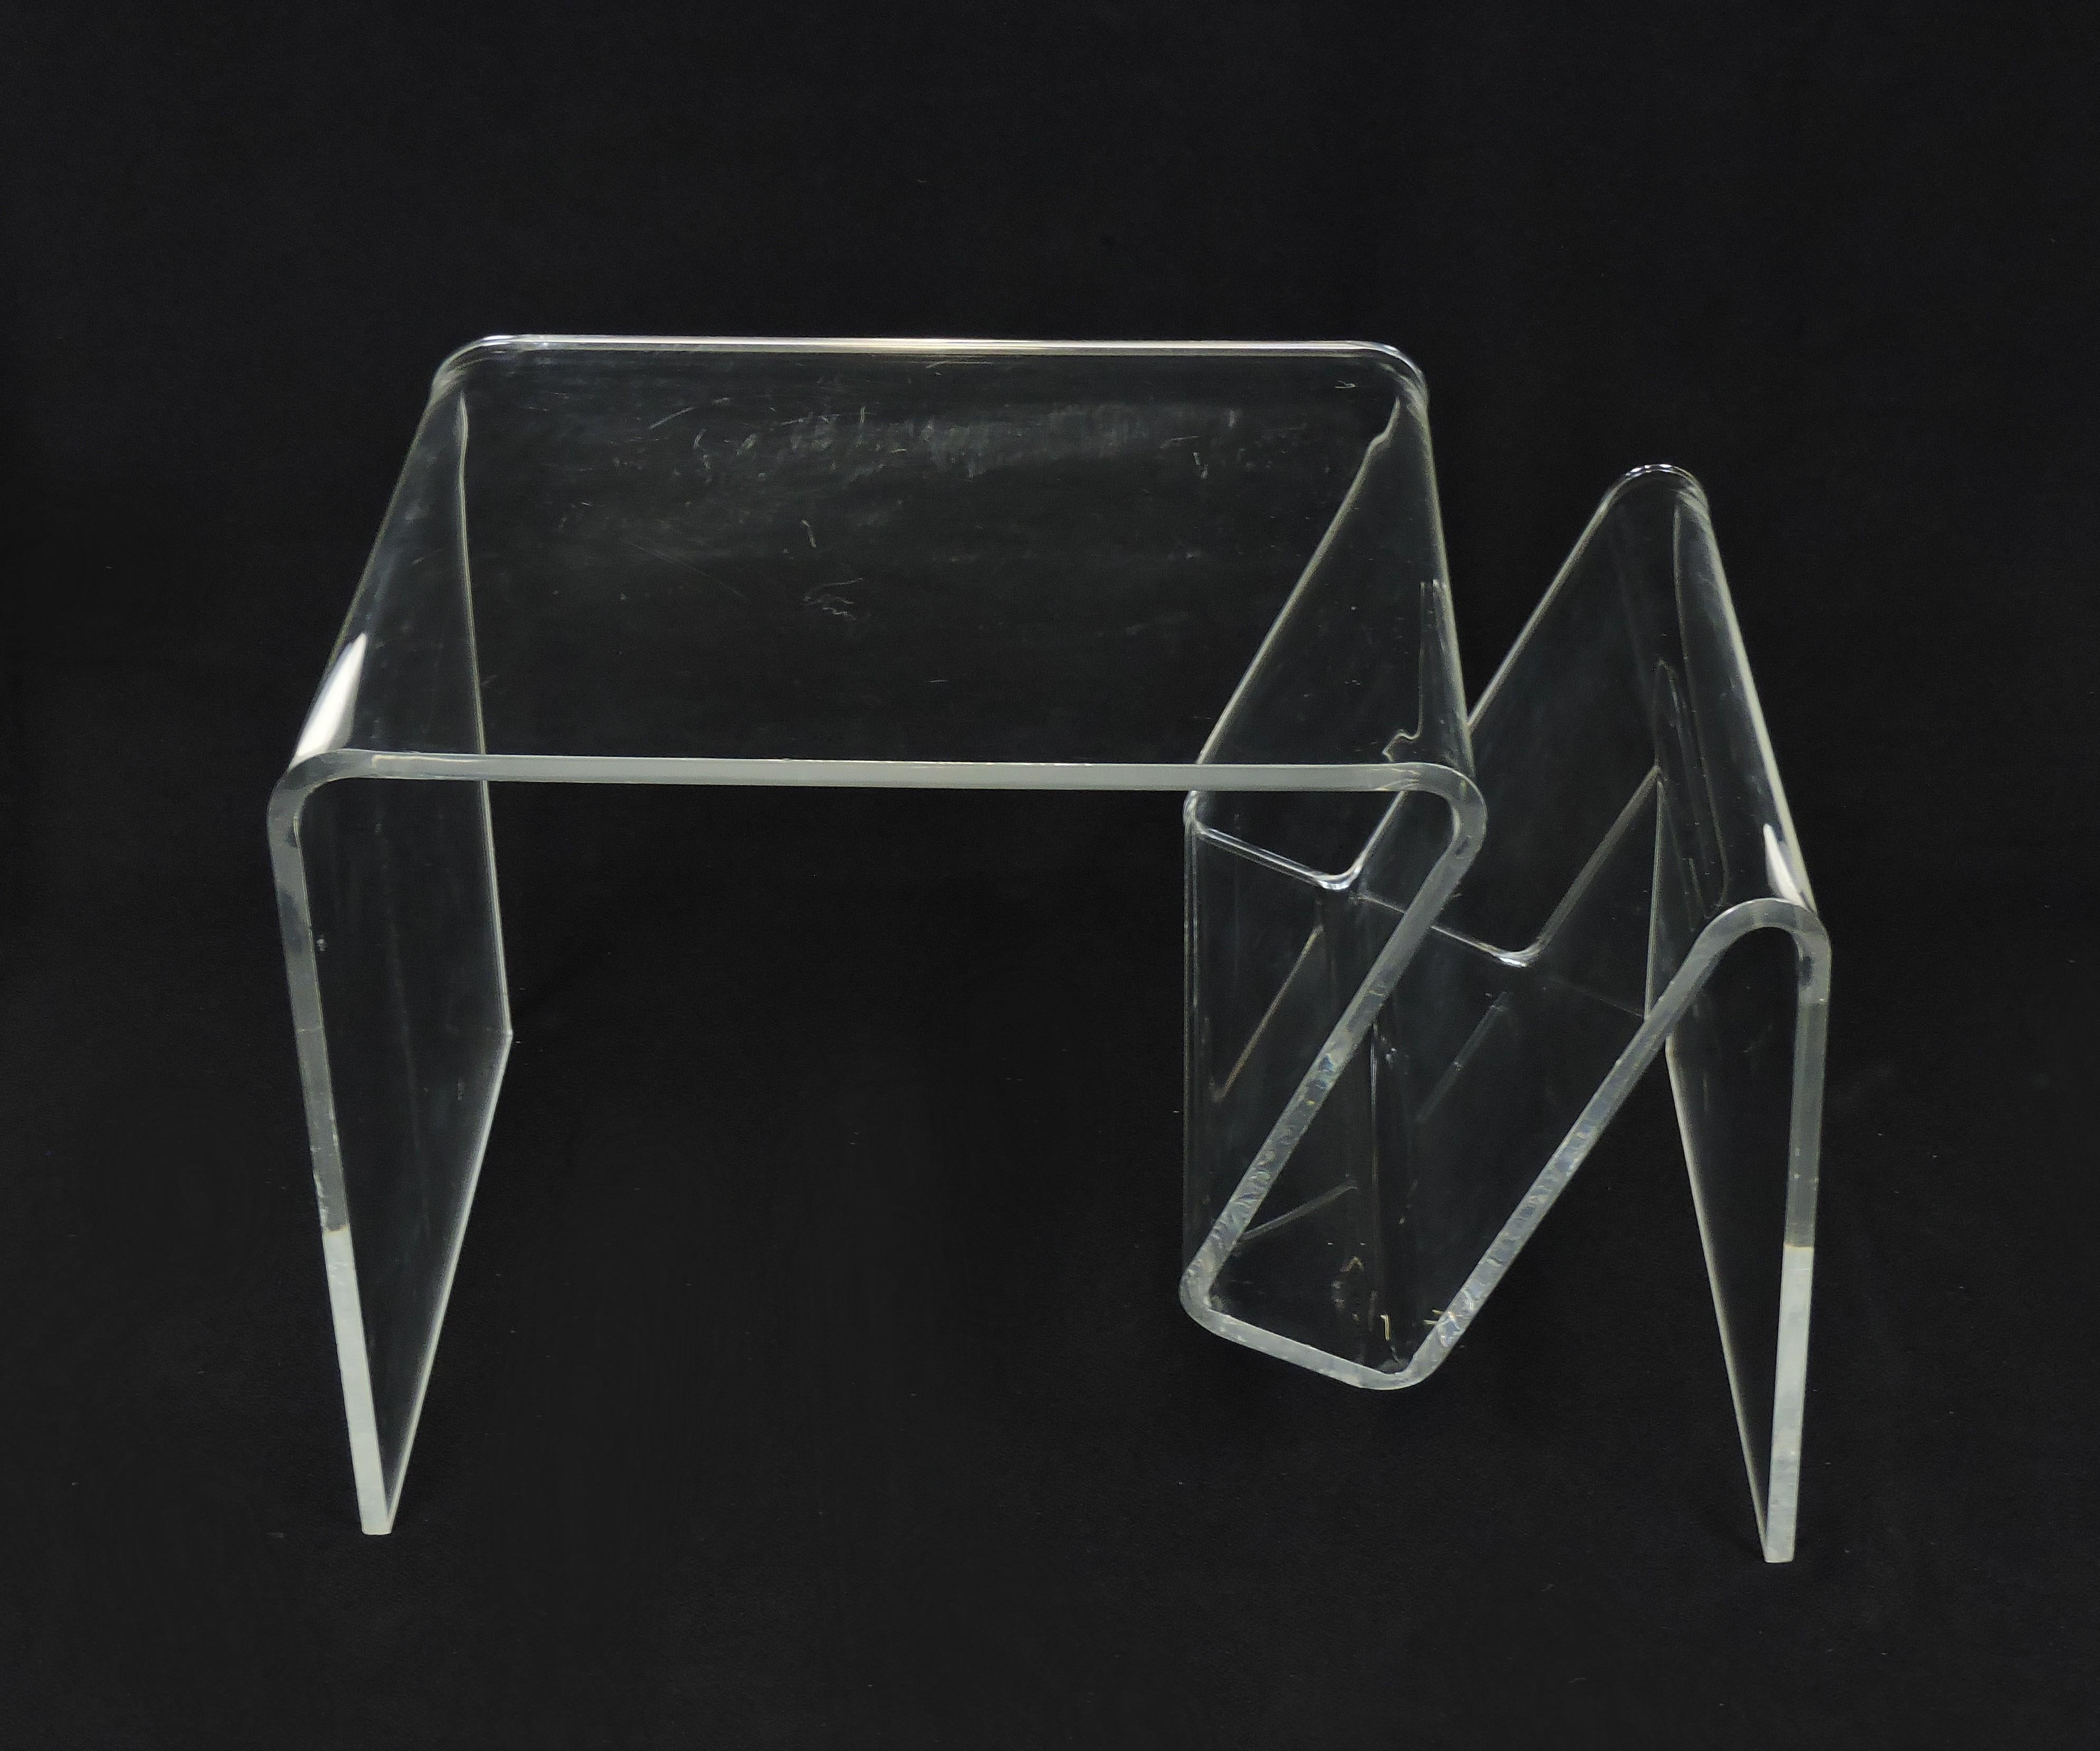 Beautiful and practical clear Lucite end table that also has a place to hold magazines. This table is formed from one continuous piece of half-inch thick molded clear Lucite. A very similar design by Andrew Ivar Morrison is in the collection of the